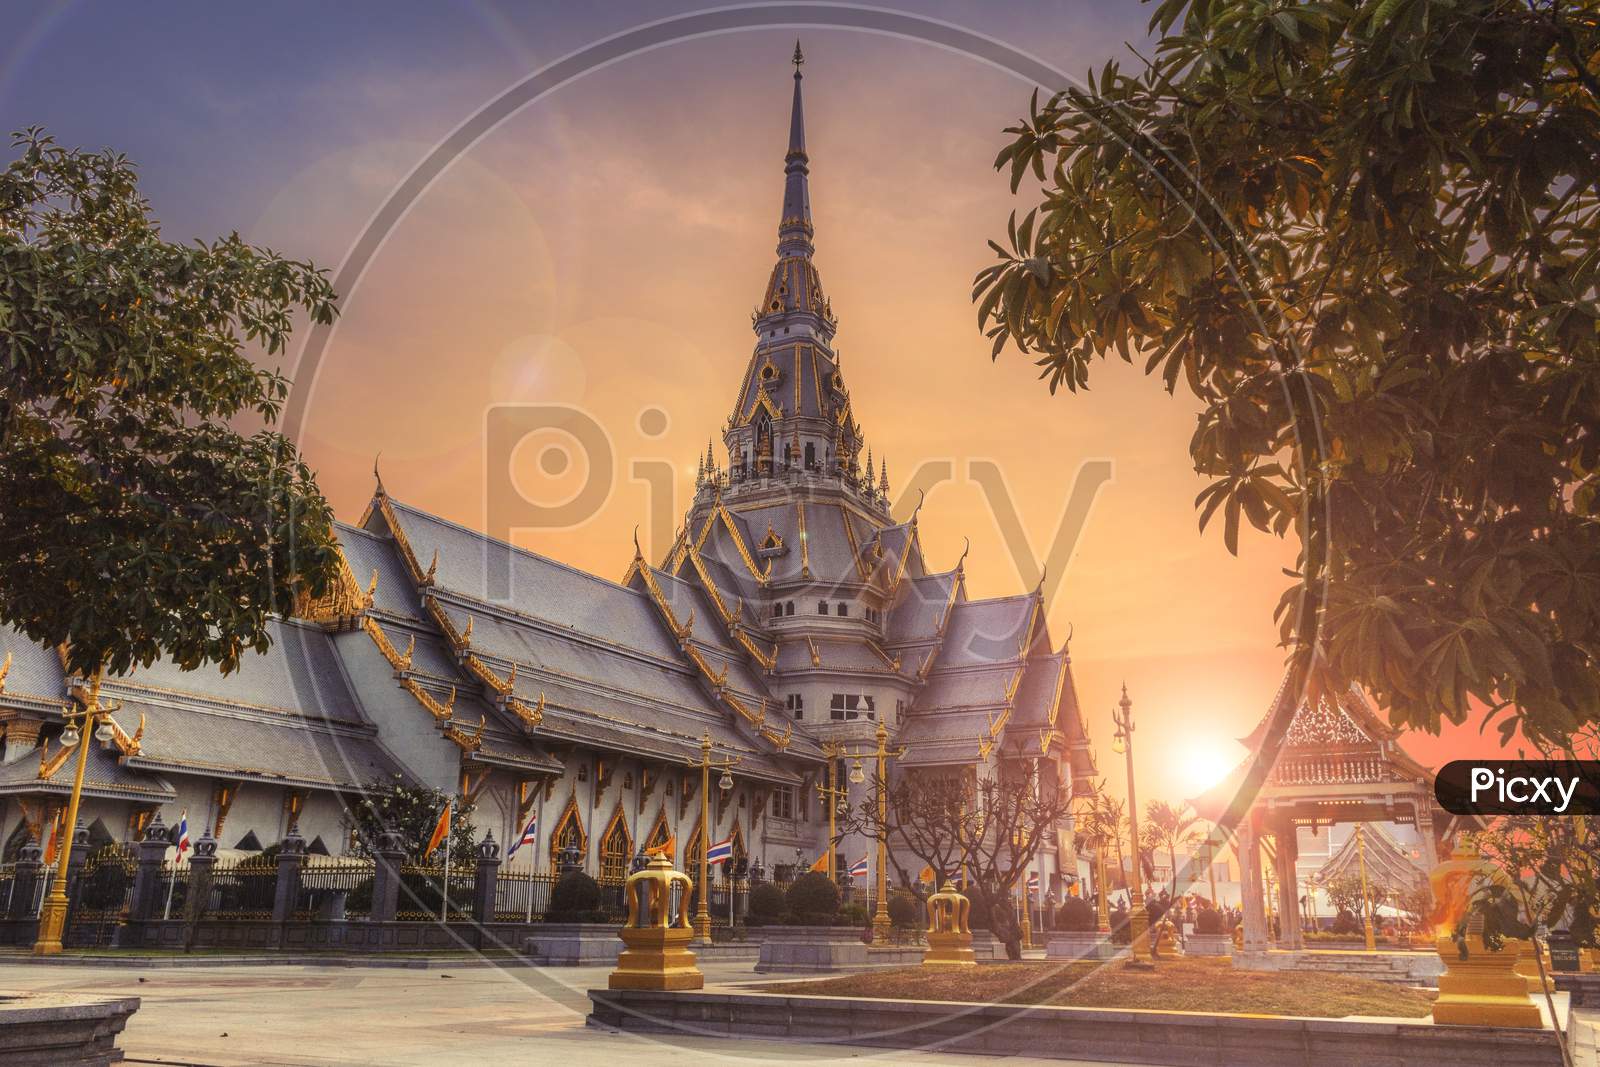 A temple in Thailand